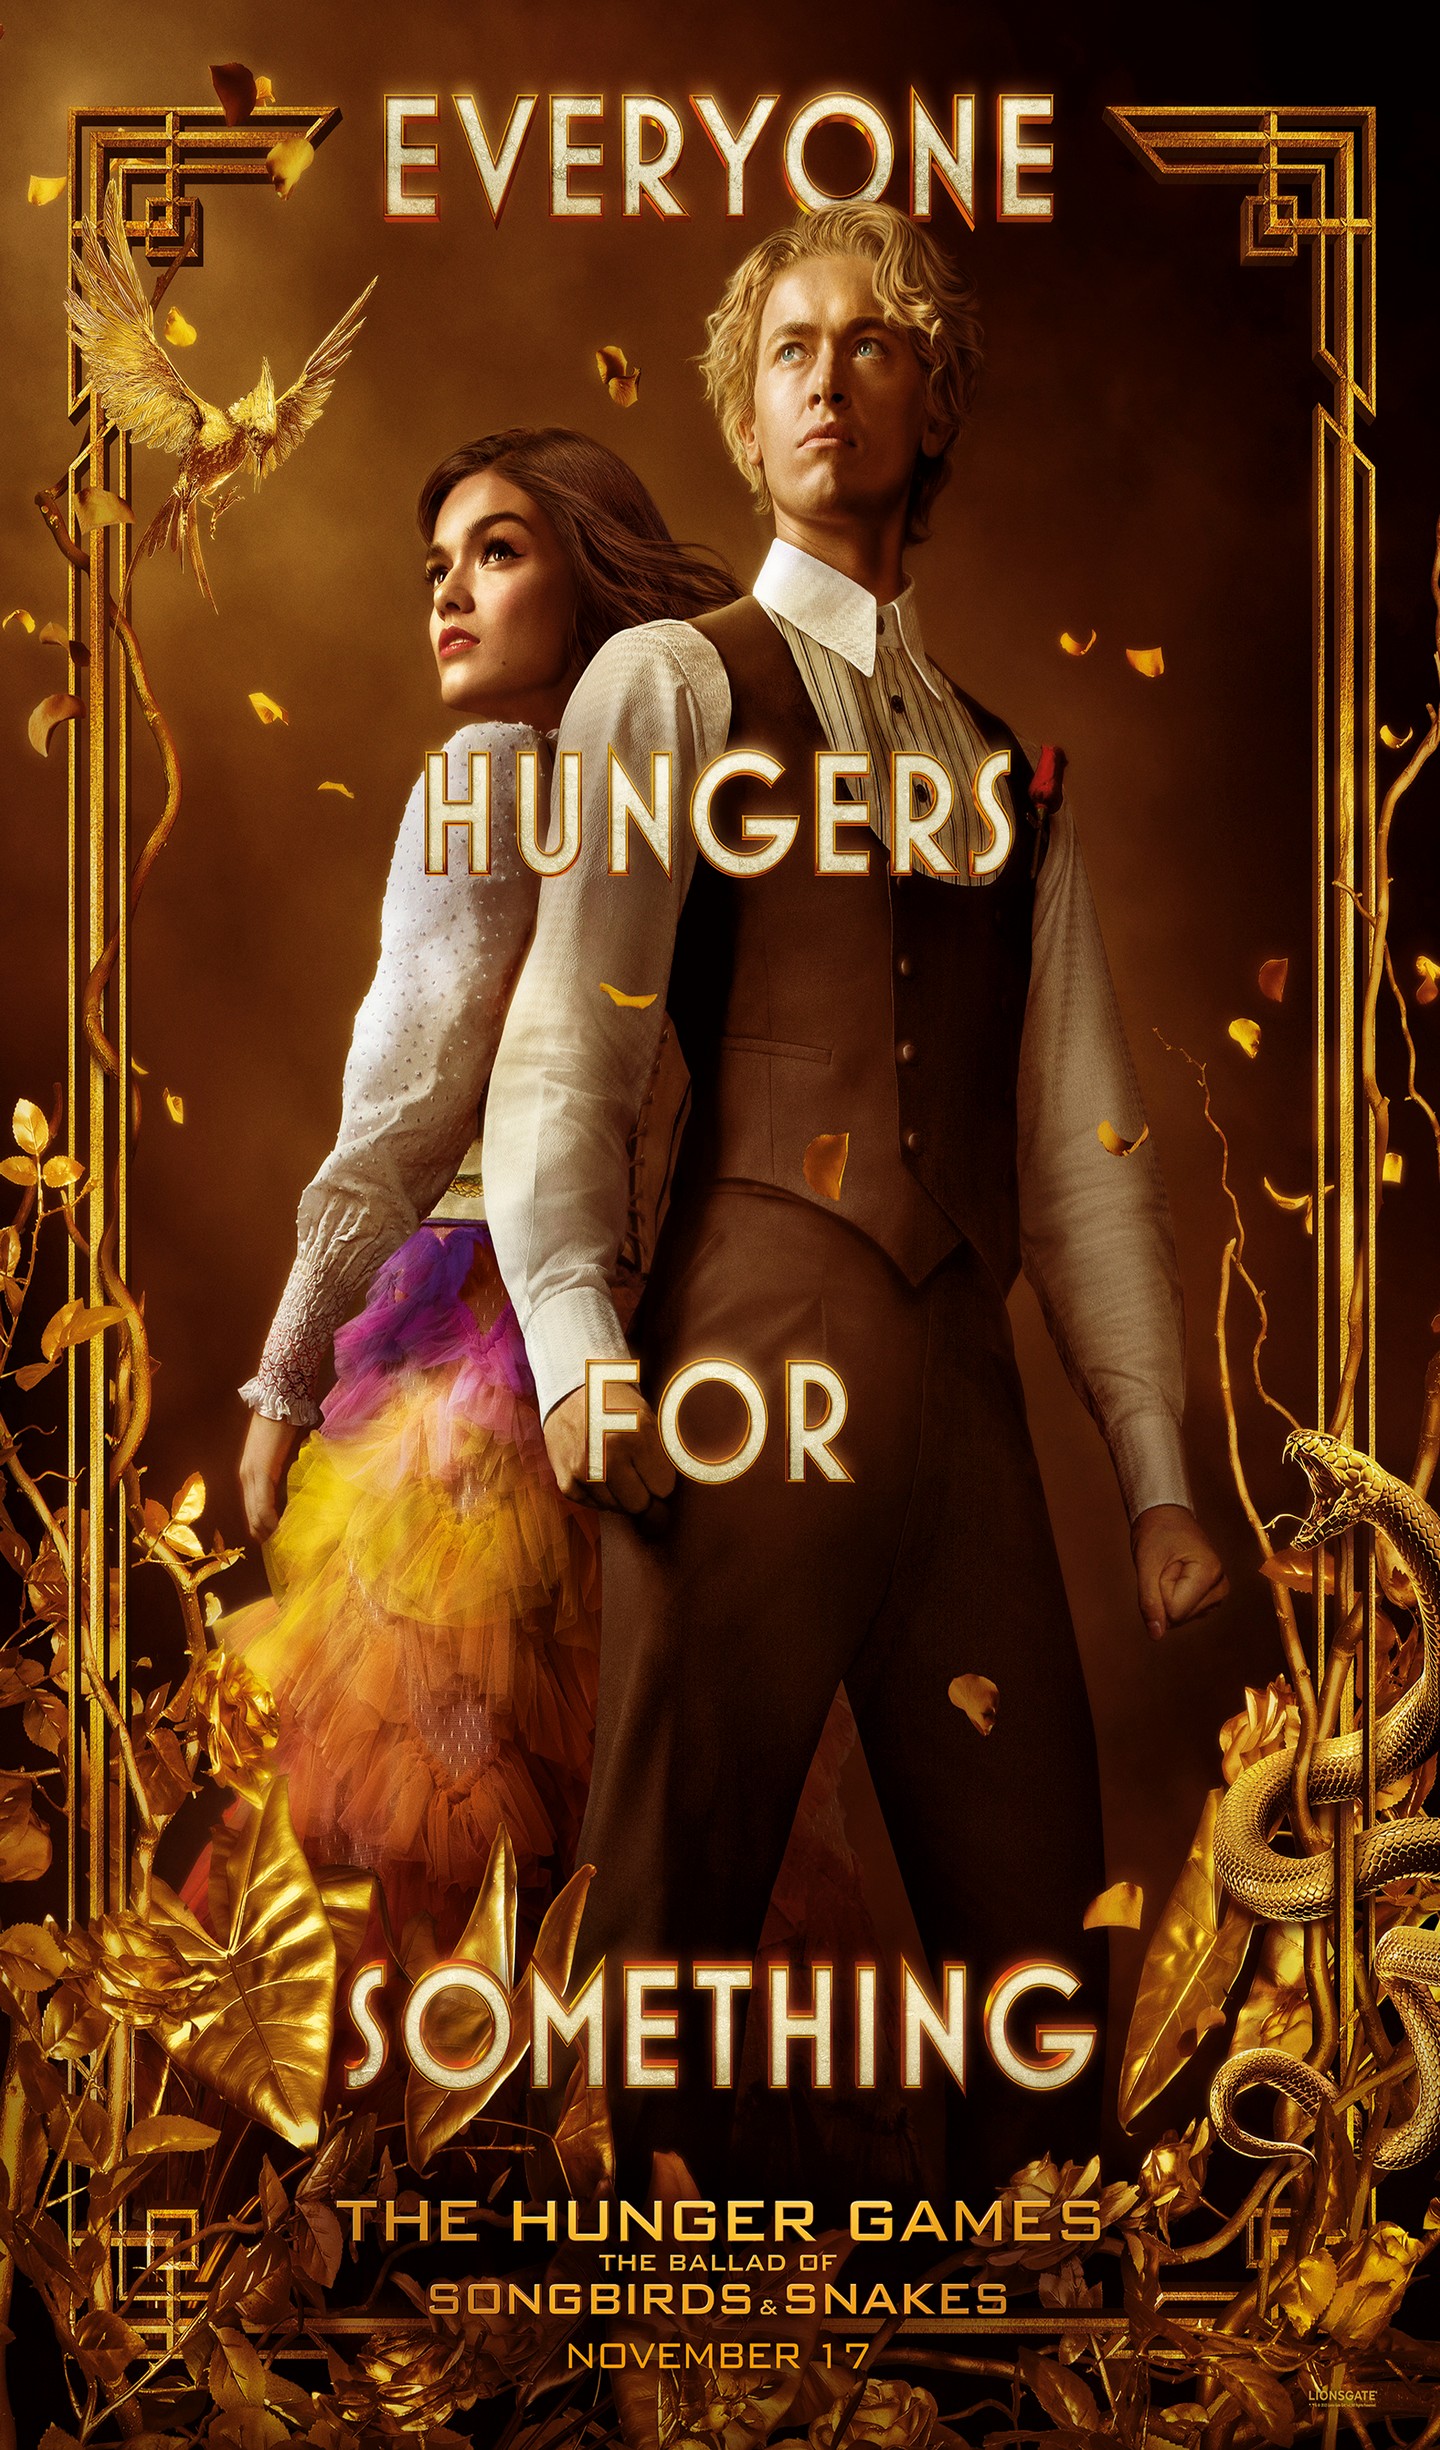 THE HUNGER GAMES: THE BALLAD OF SONGBIRDS & SNAKES – Grand Theatres